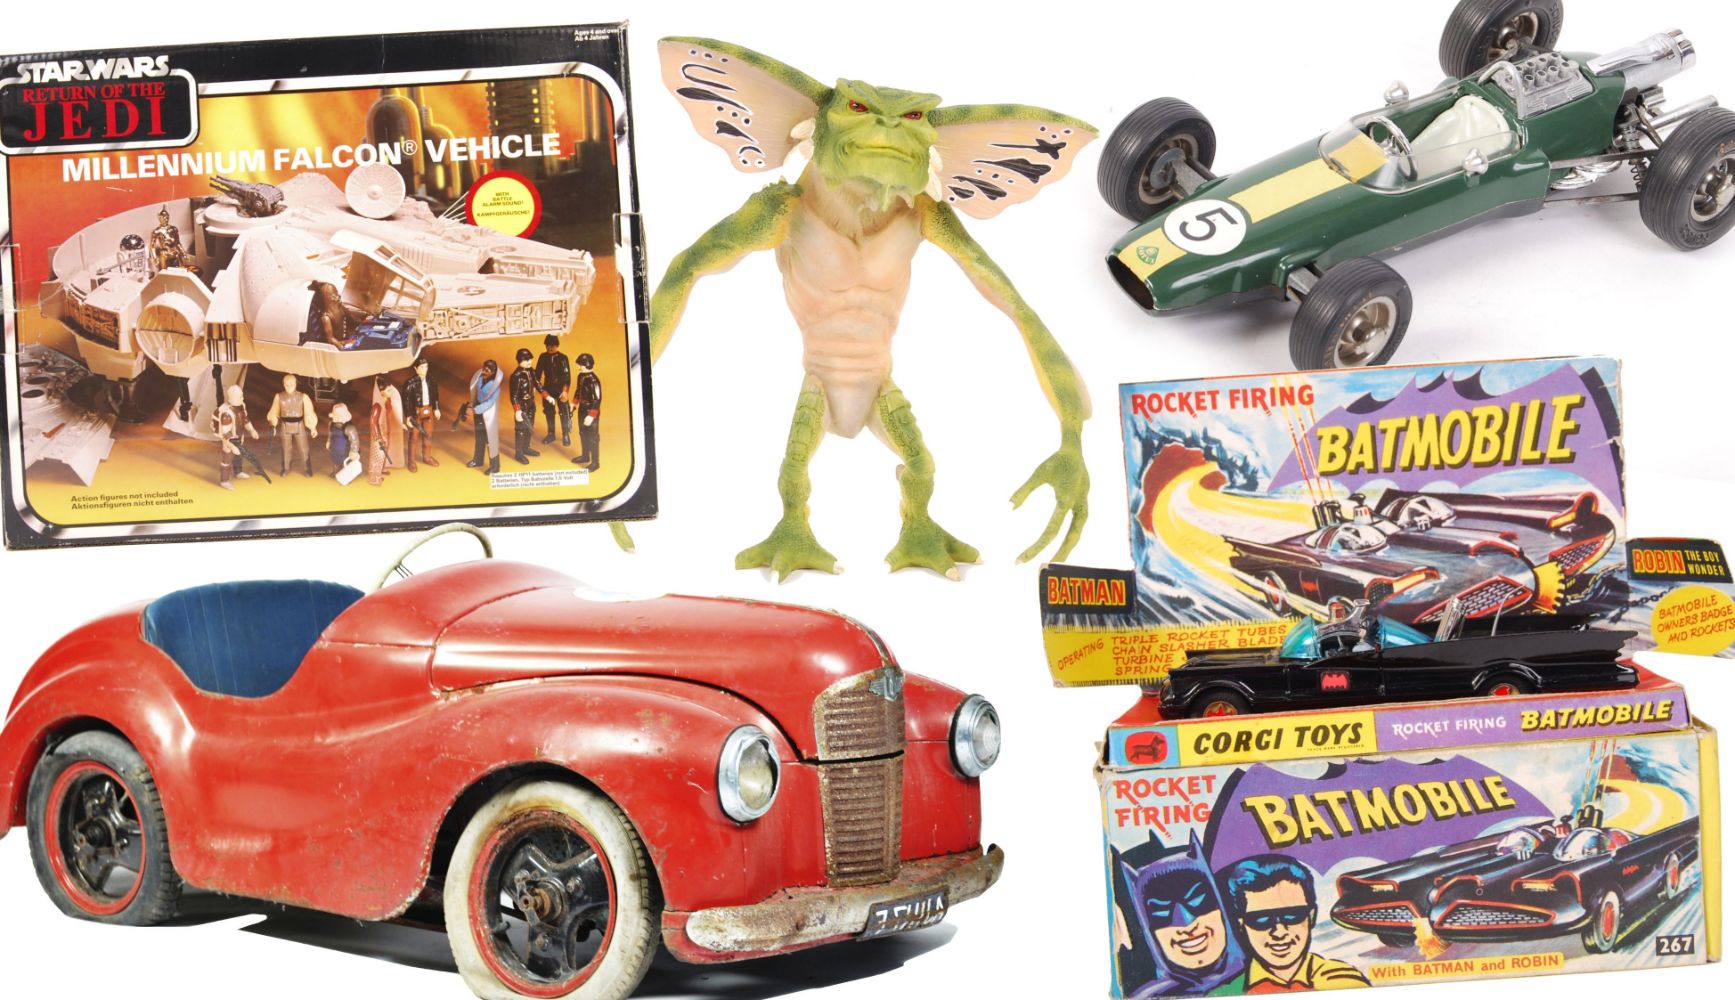 Toy Auction Day Two - Star Wars, Action Figures, Animation Artwork & Retro Gaming - East Bristol Auctions